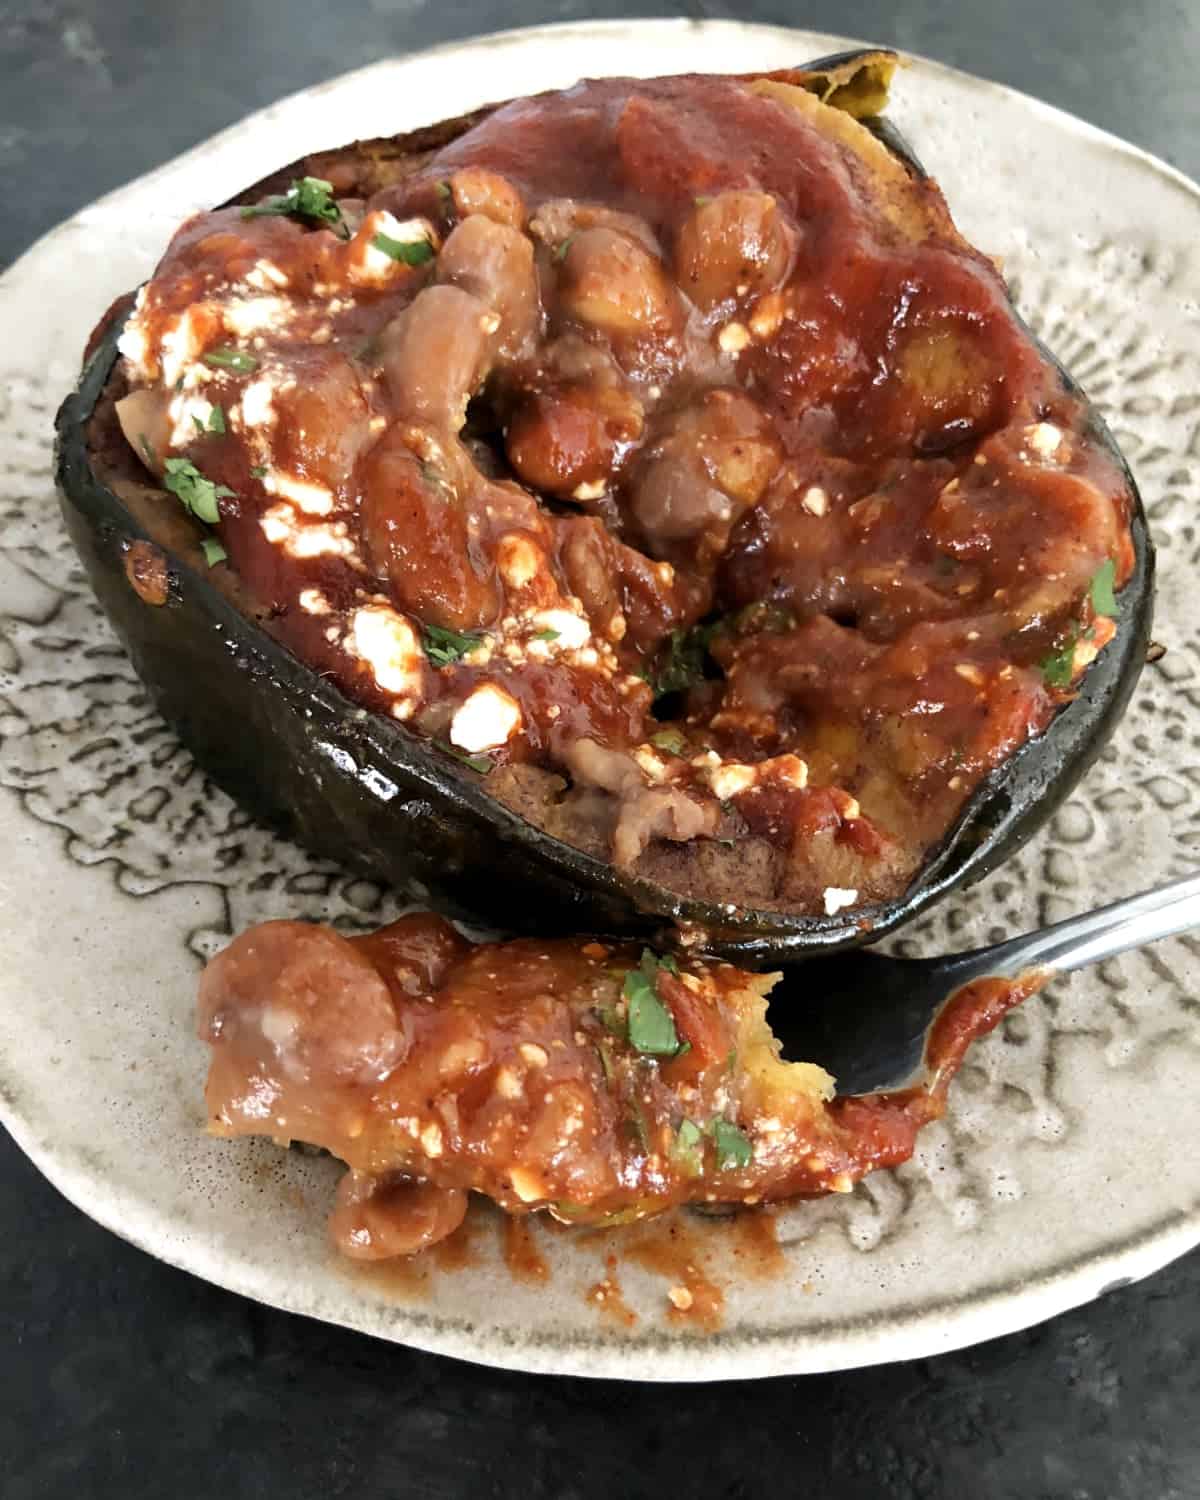 Oven-roasted acorn squash with red chili sauce and pinto beans